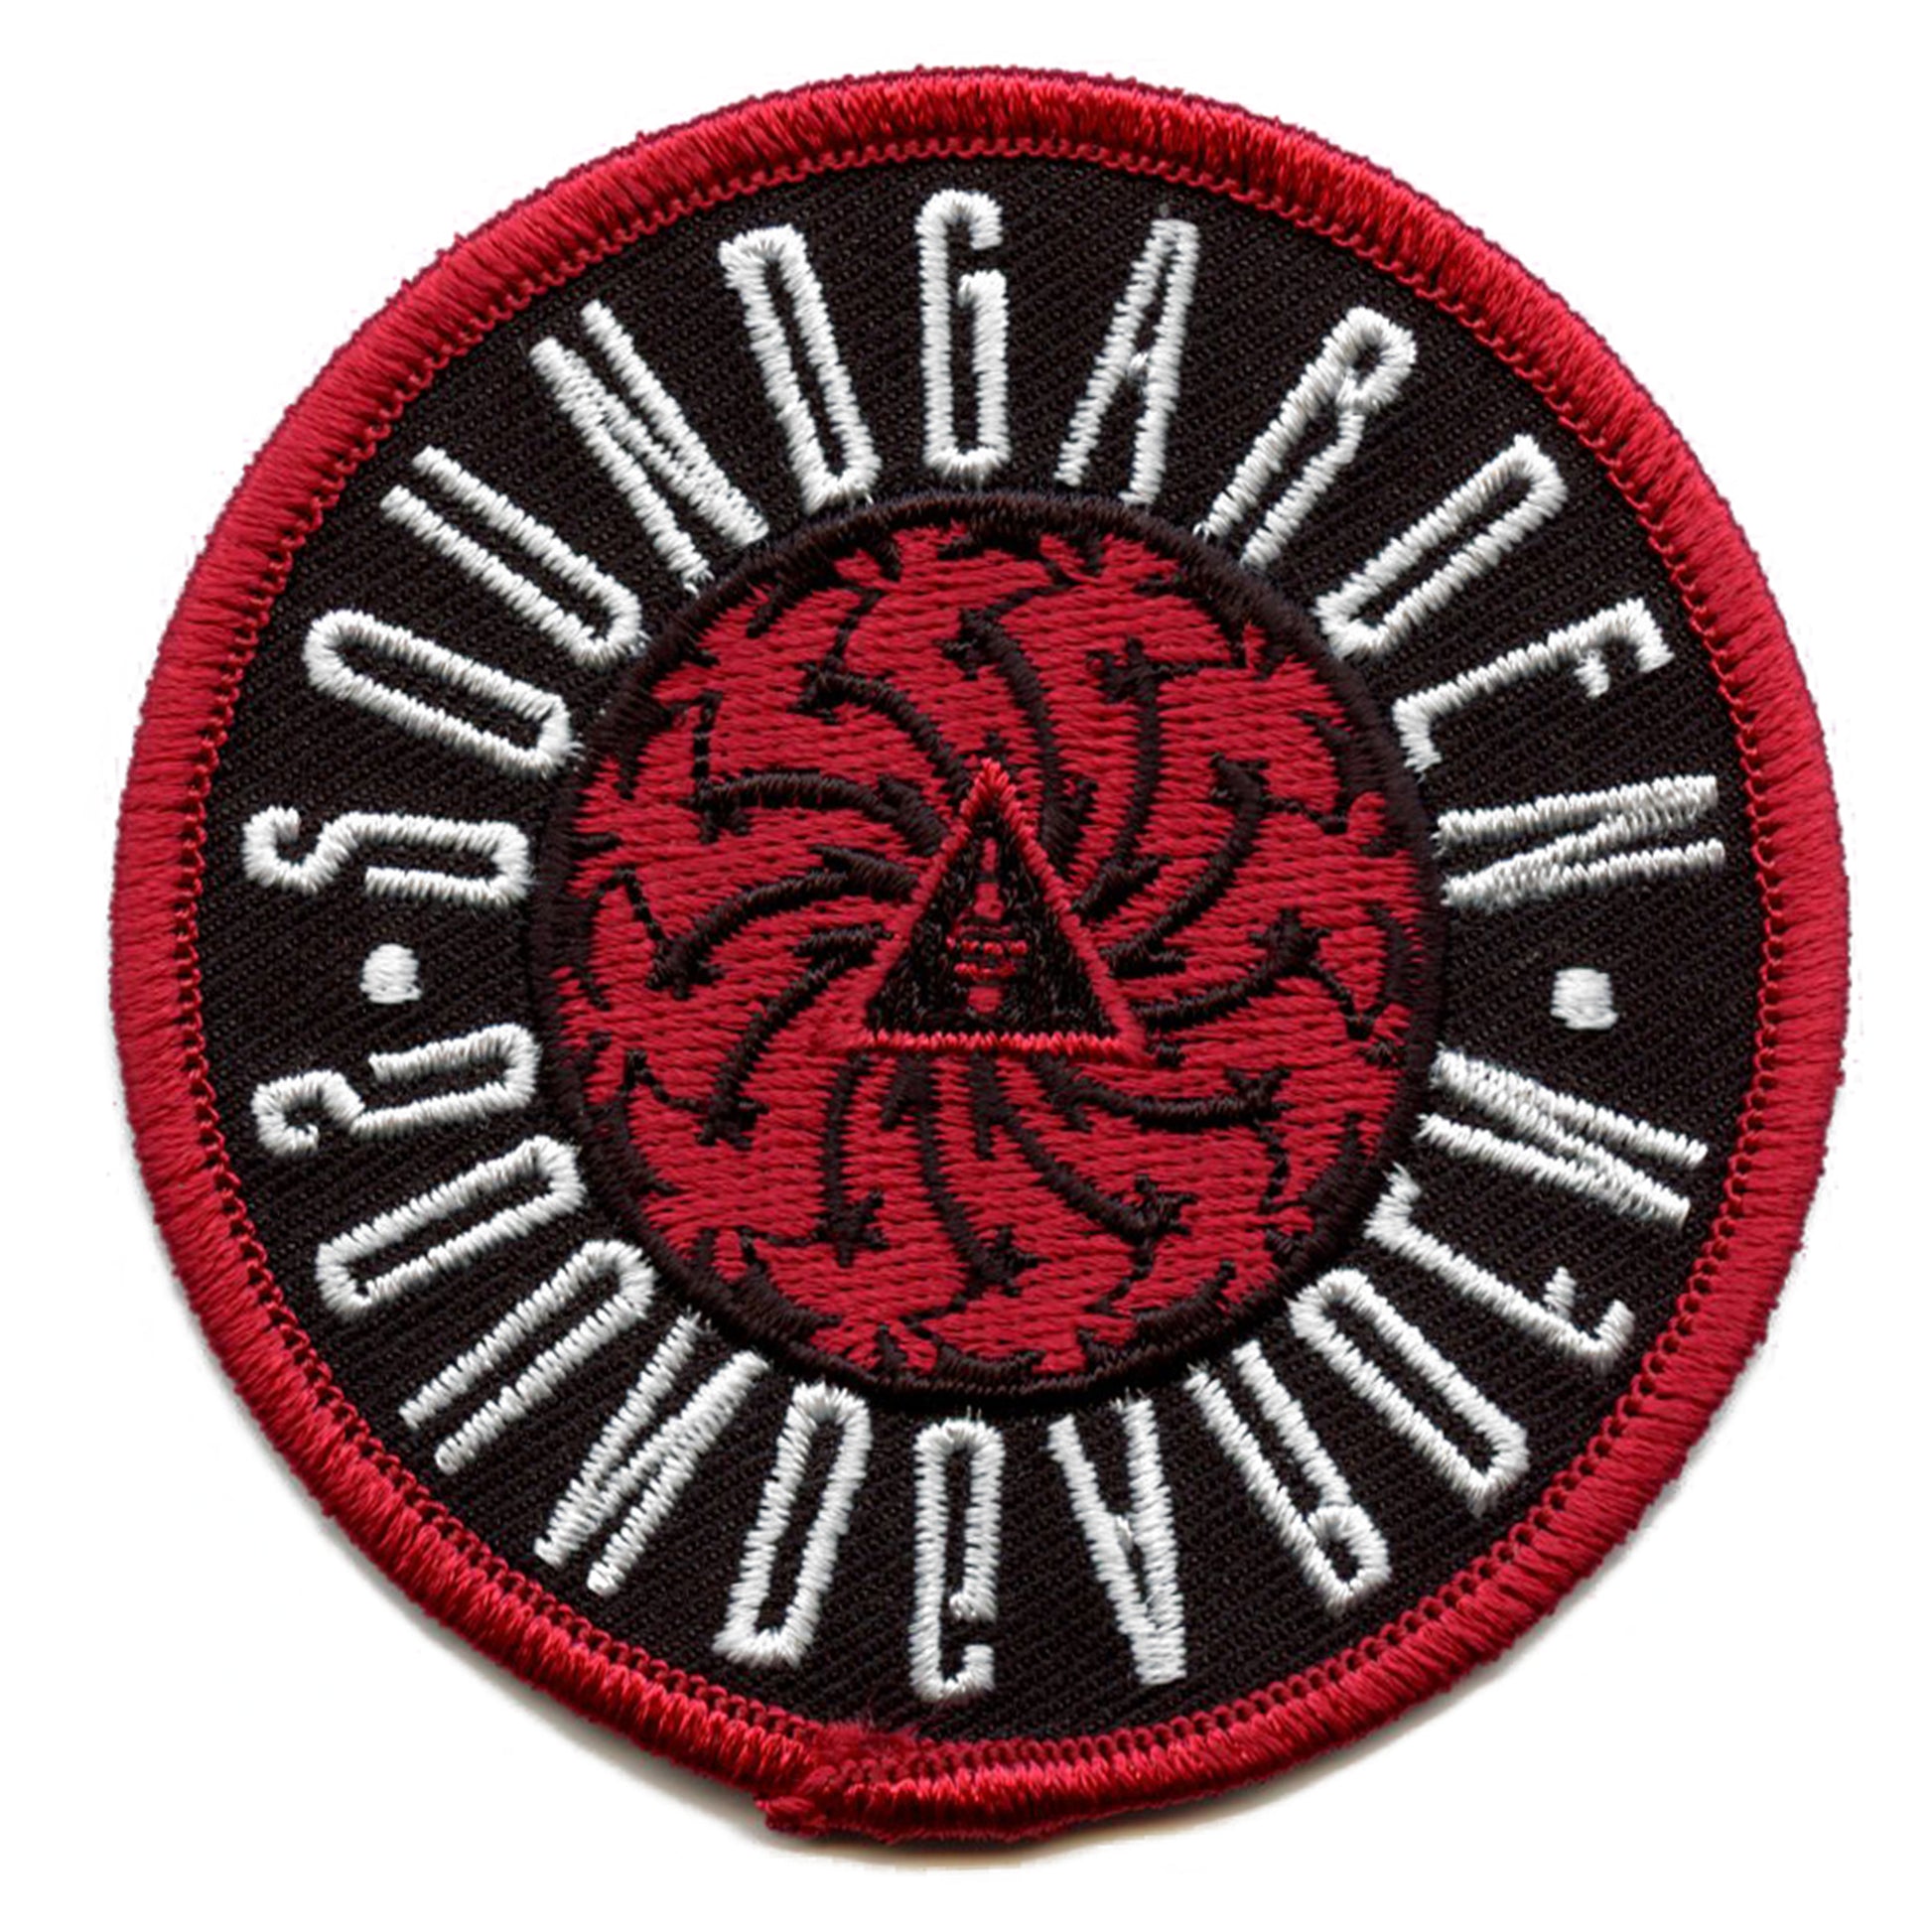 Soundgarden Bad Motofinger Patch Seattle Rock Band Embroidered Iron On